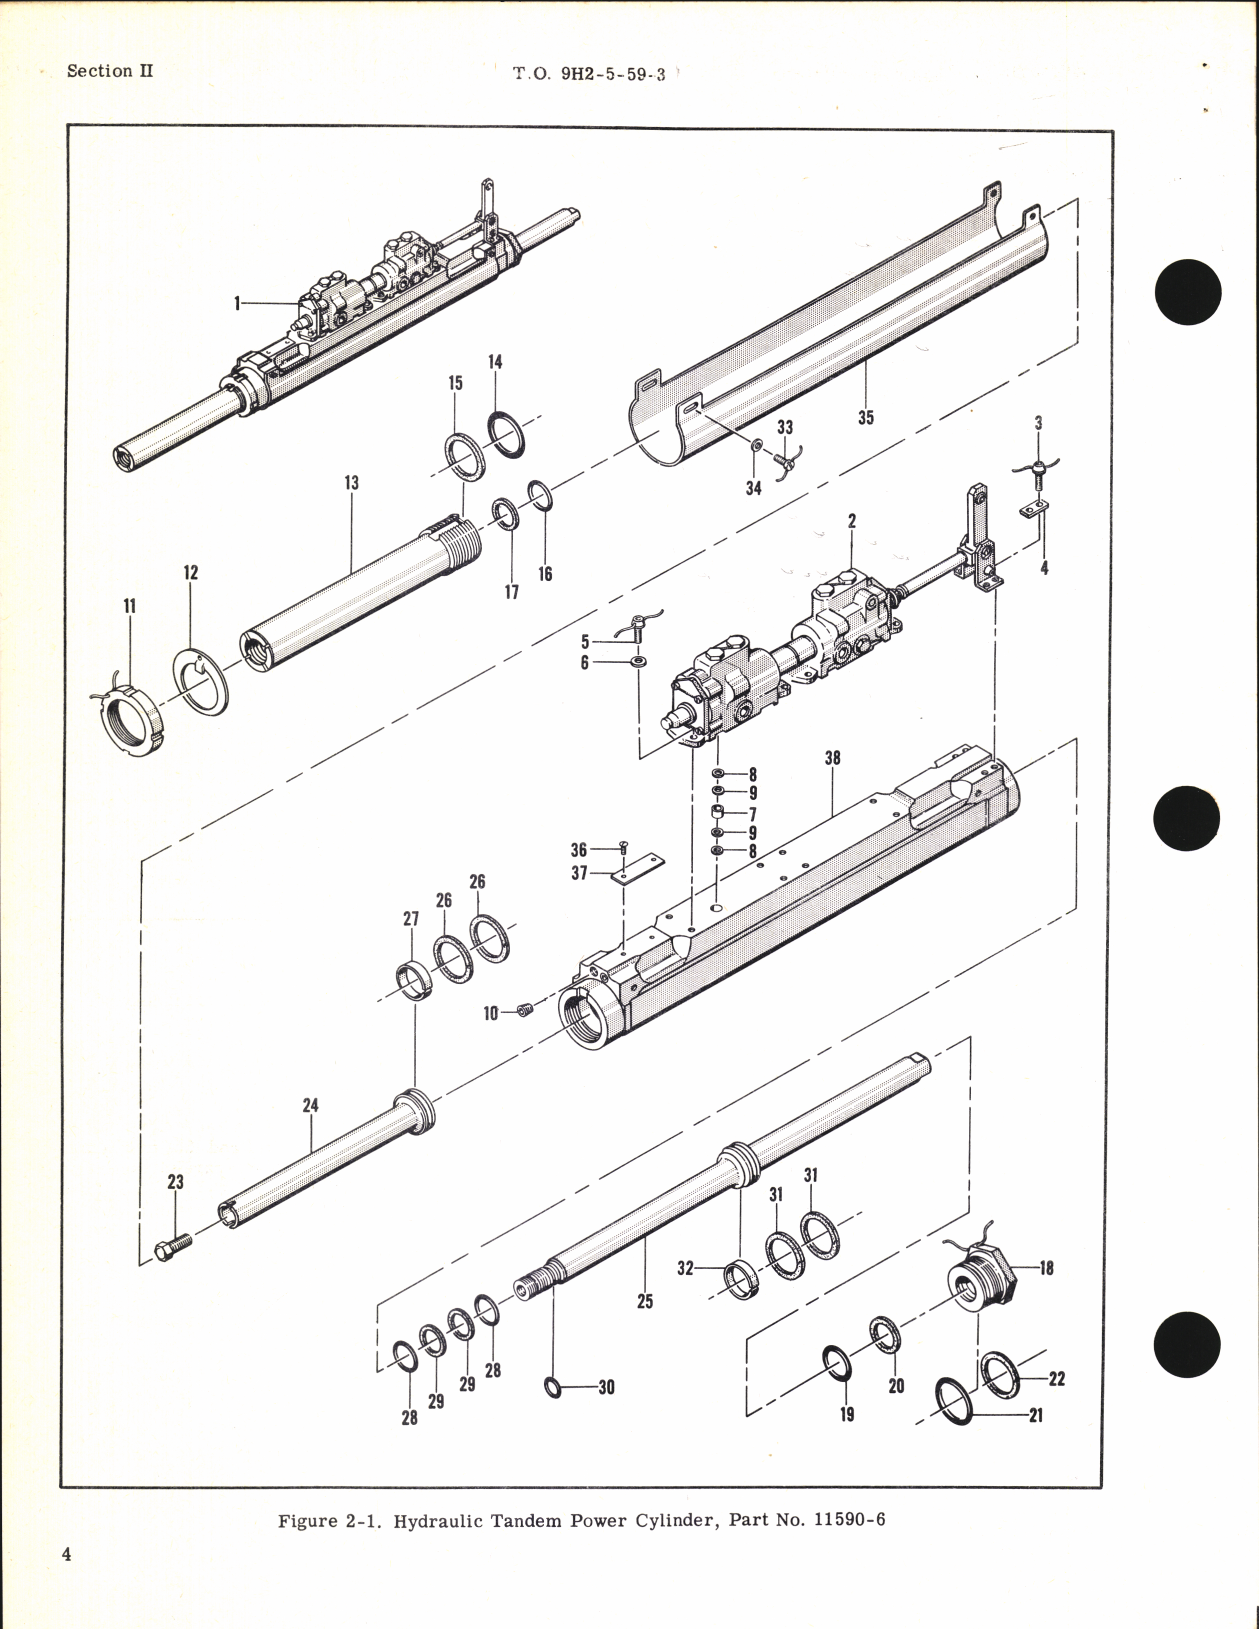 Sample page 6 from AirCorps Library document: Overhaul Instructions for Hydraulic Tandem power cylinder Part No. 11590-6